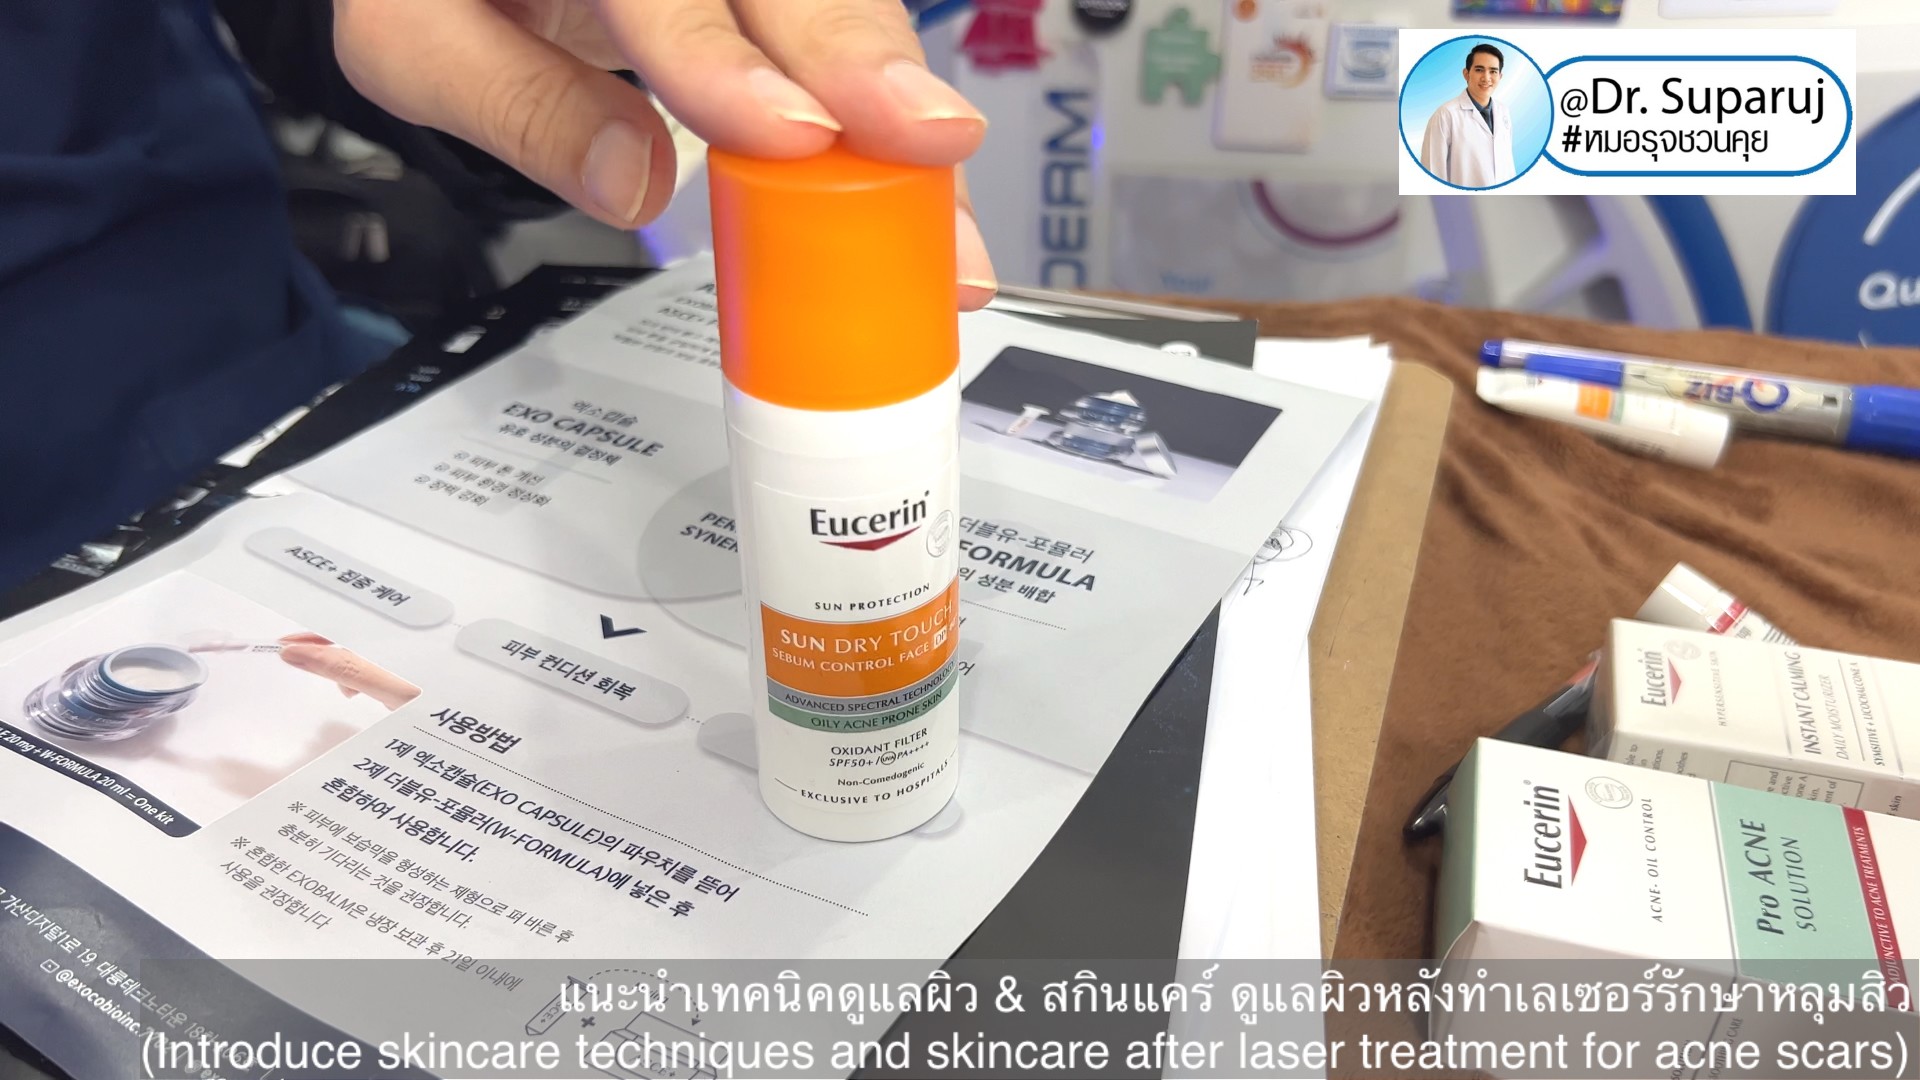 Update & Review เทคนิครักษาหลุมสิว (Acne Scar Treatment: Update & Review)